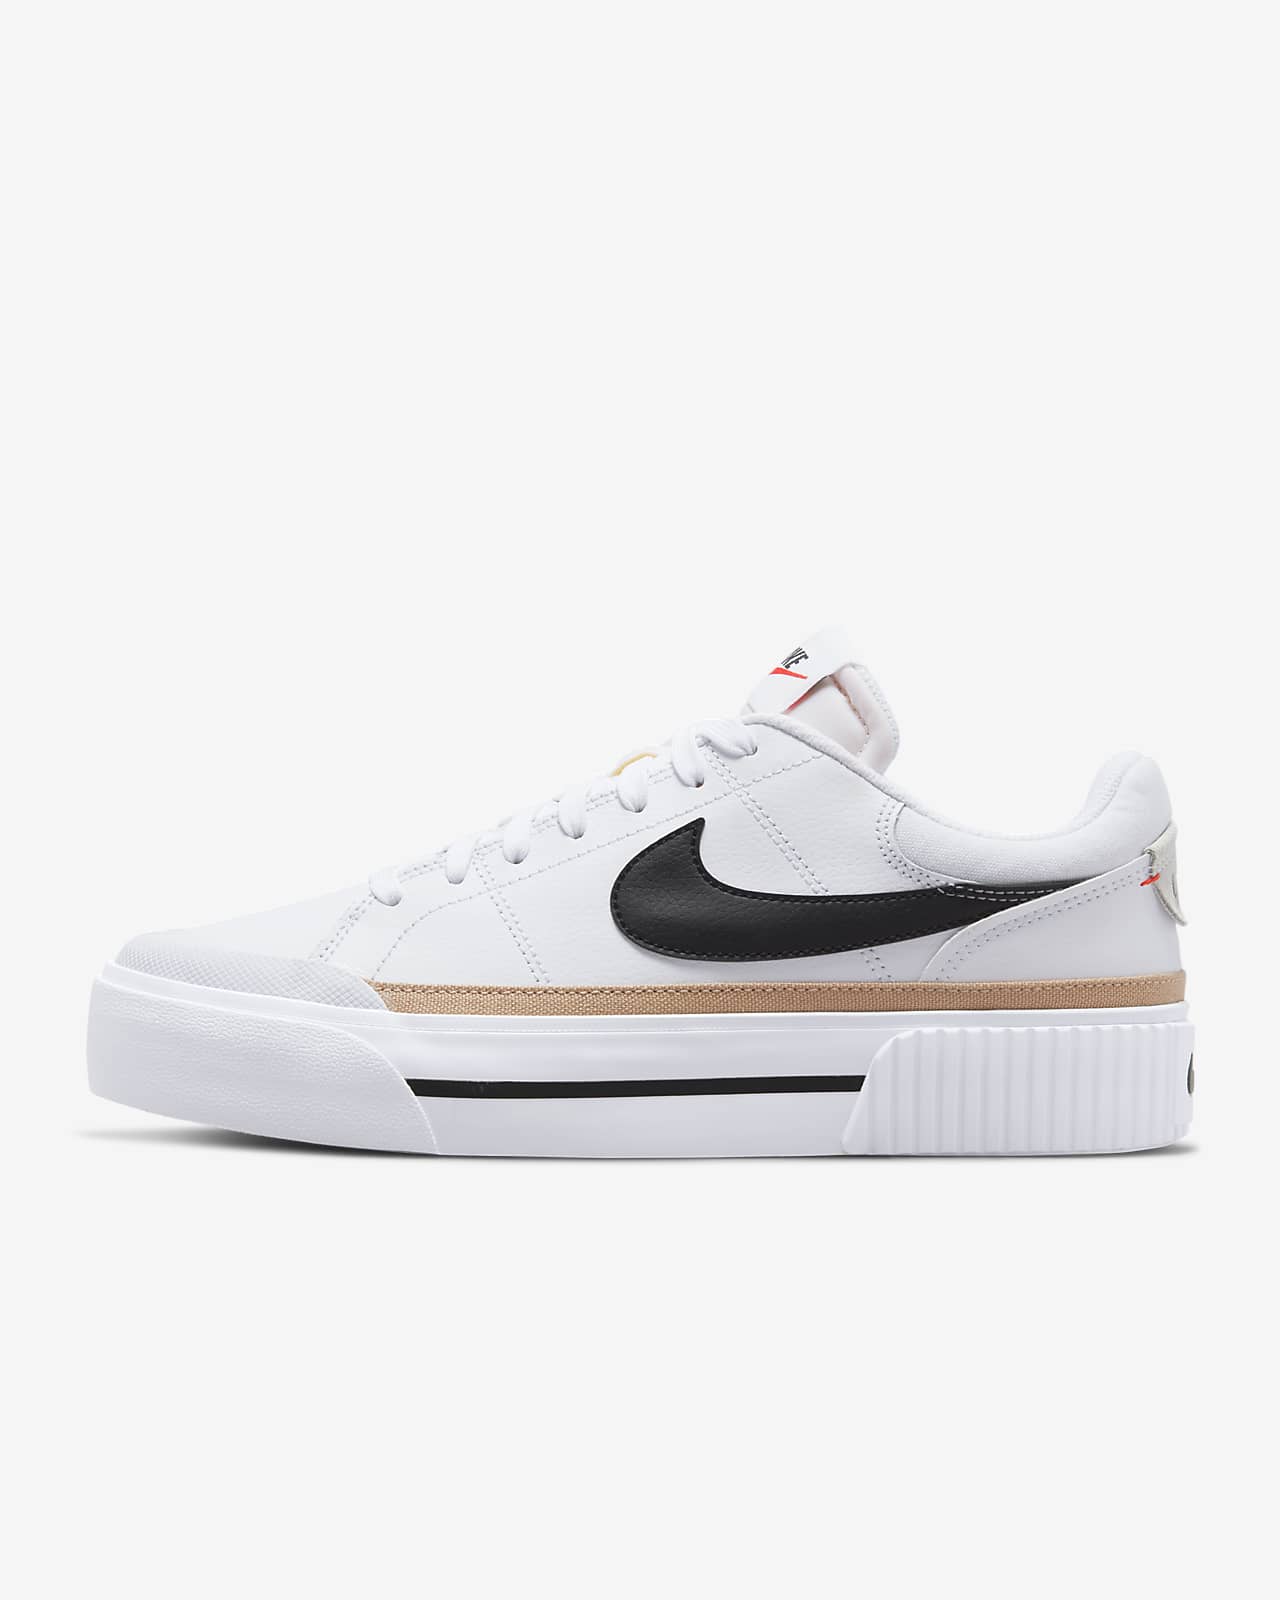 Chaussures Nike Court Legacy Lift pour Femme